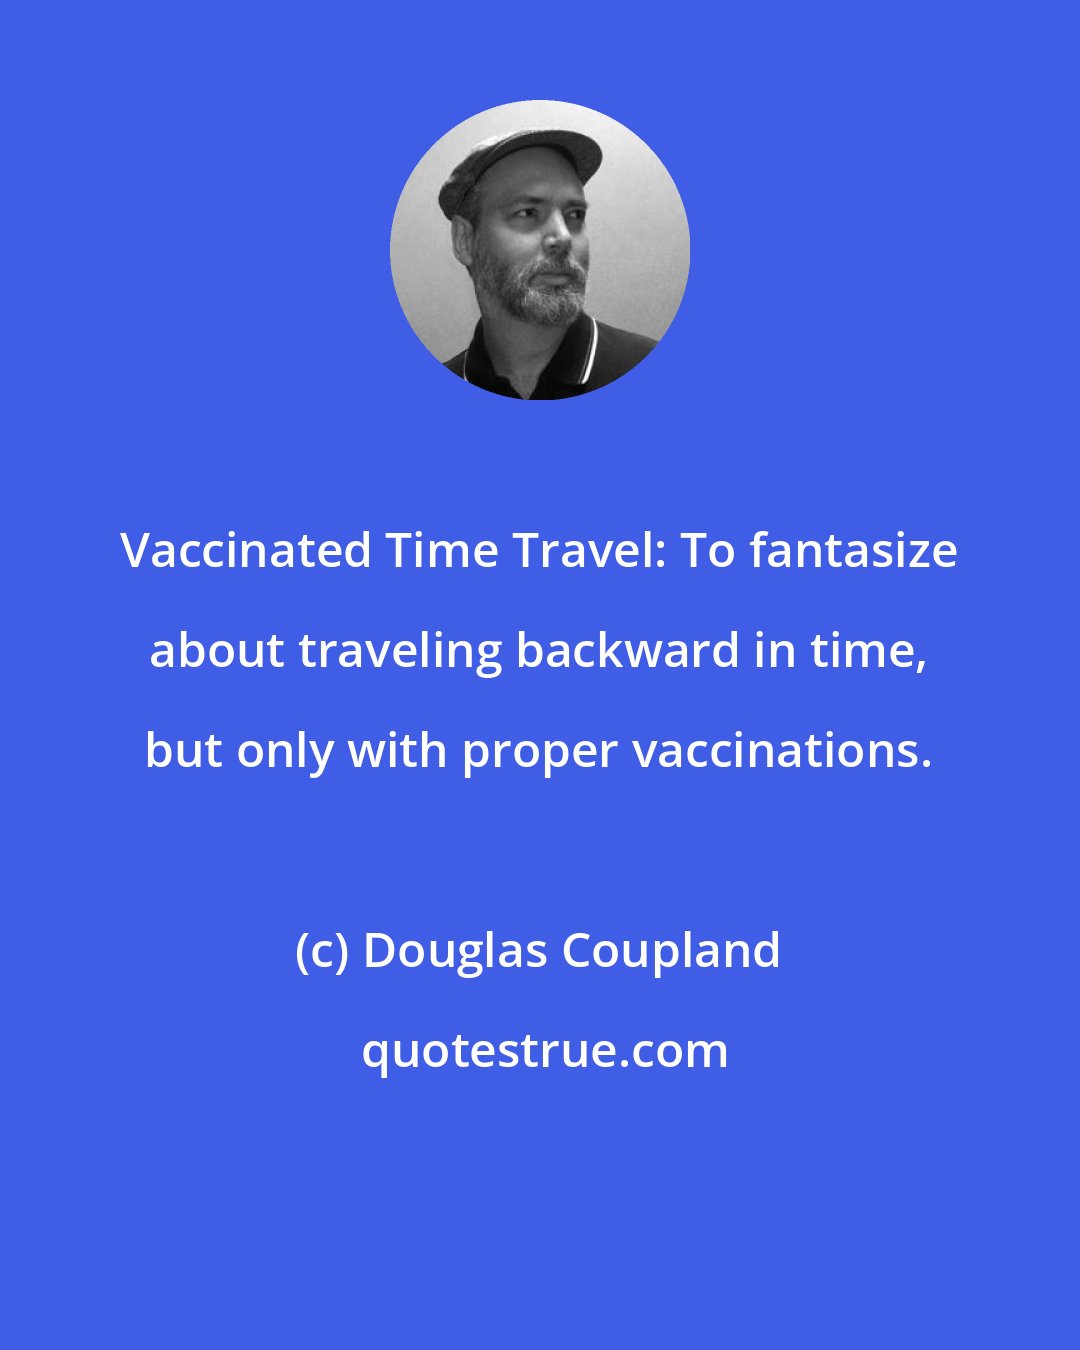 Douglas Coupland: Vaccinated Time Travel: To fantasize about traveling backward in time, but only with proper vaccinations.